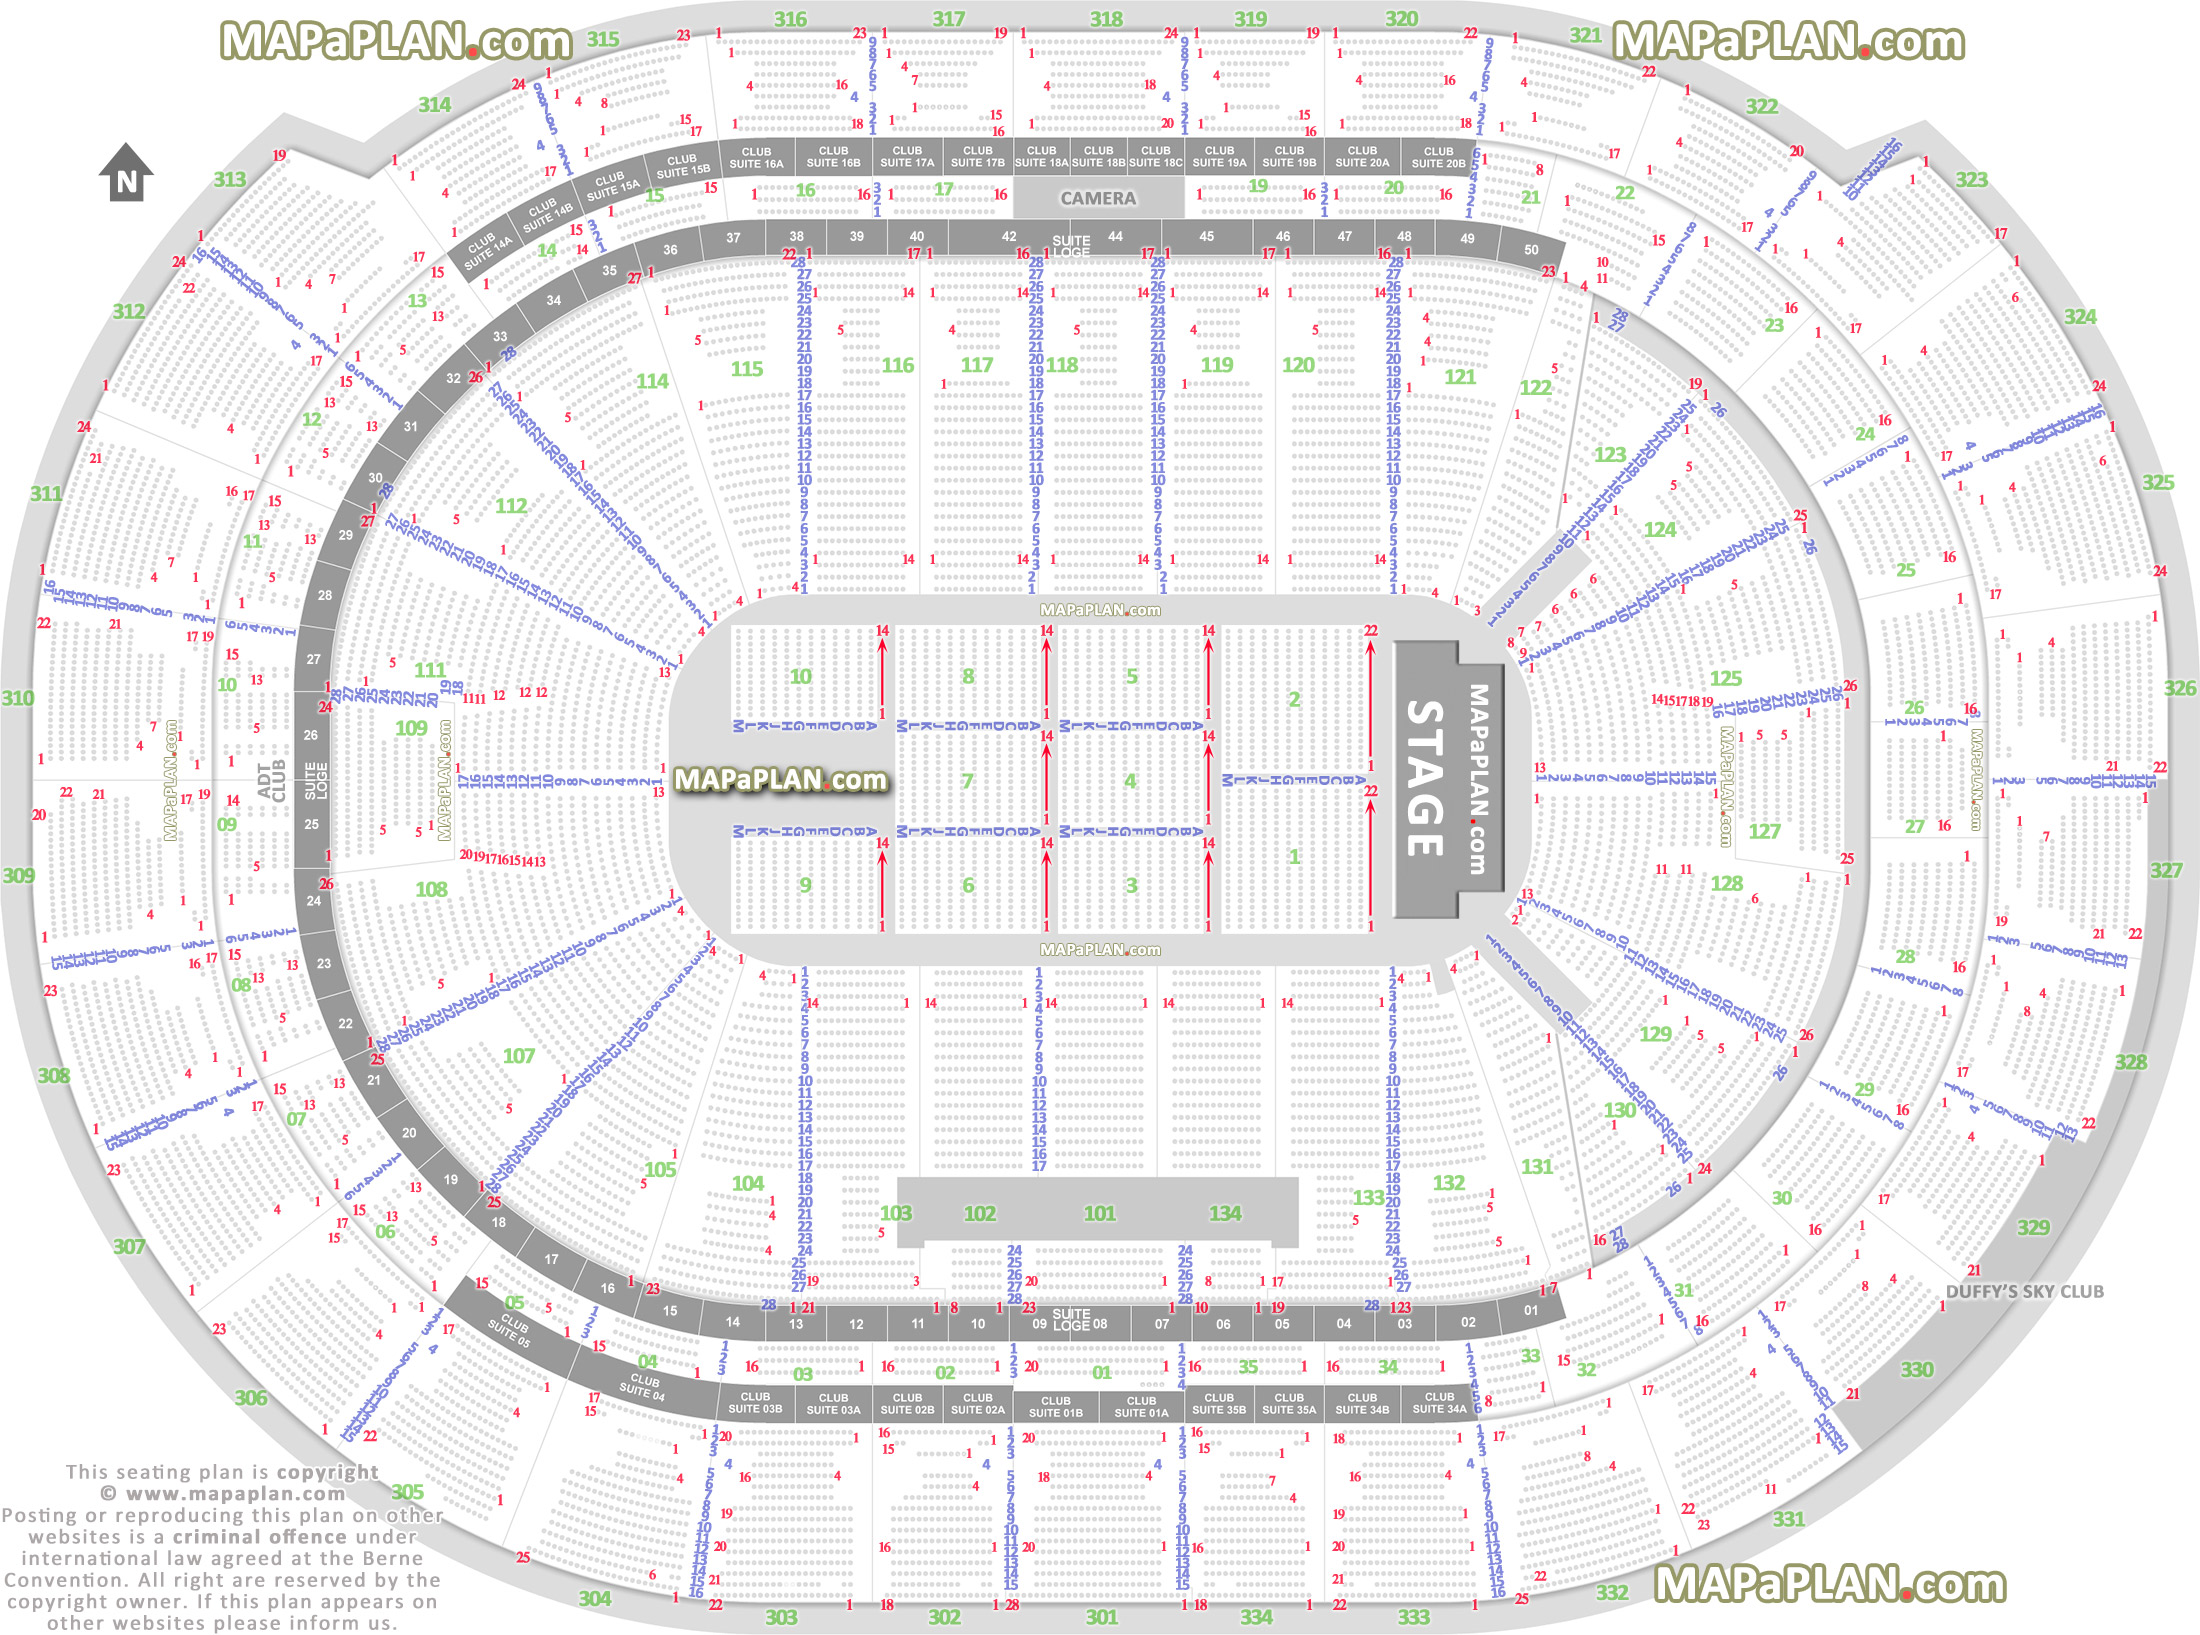 BB&T Center Detailed seat & row numbers end stage